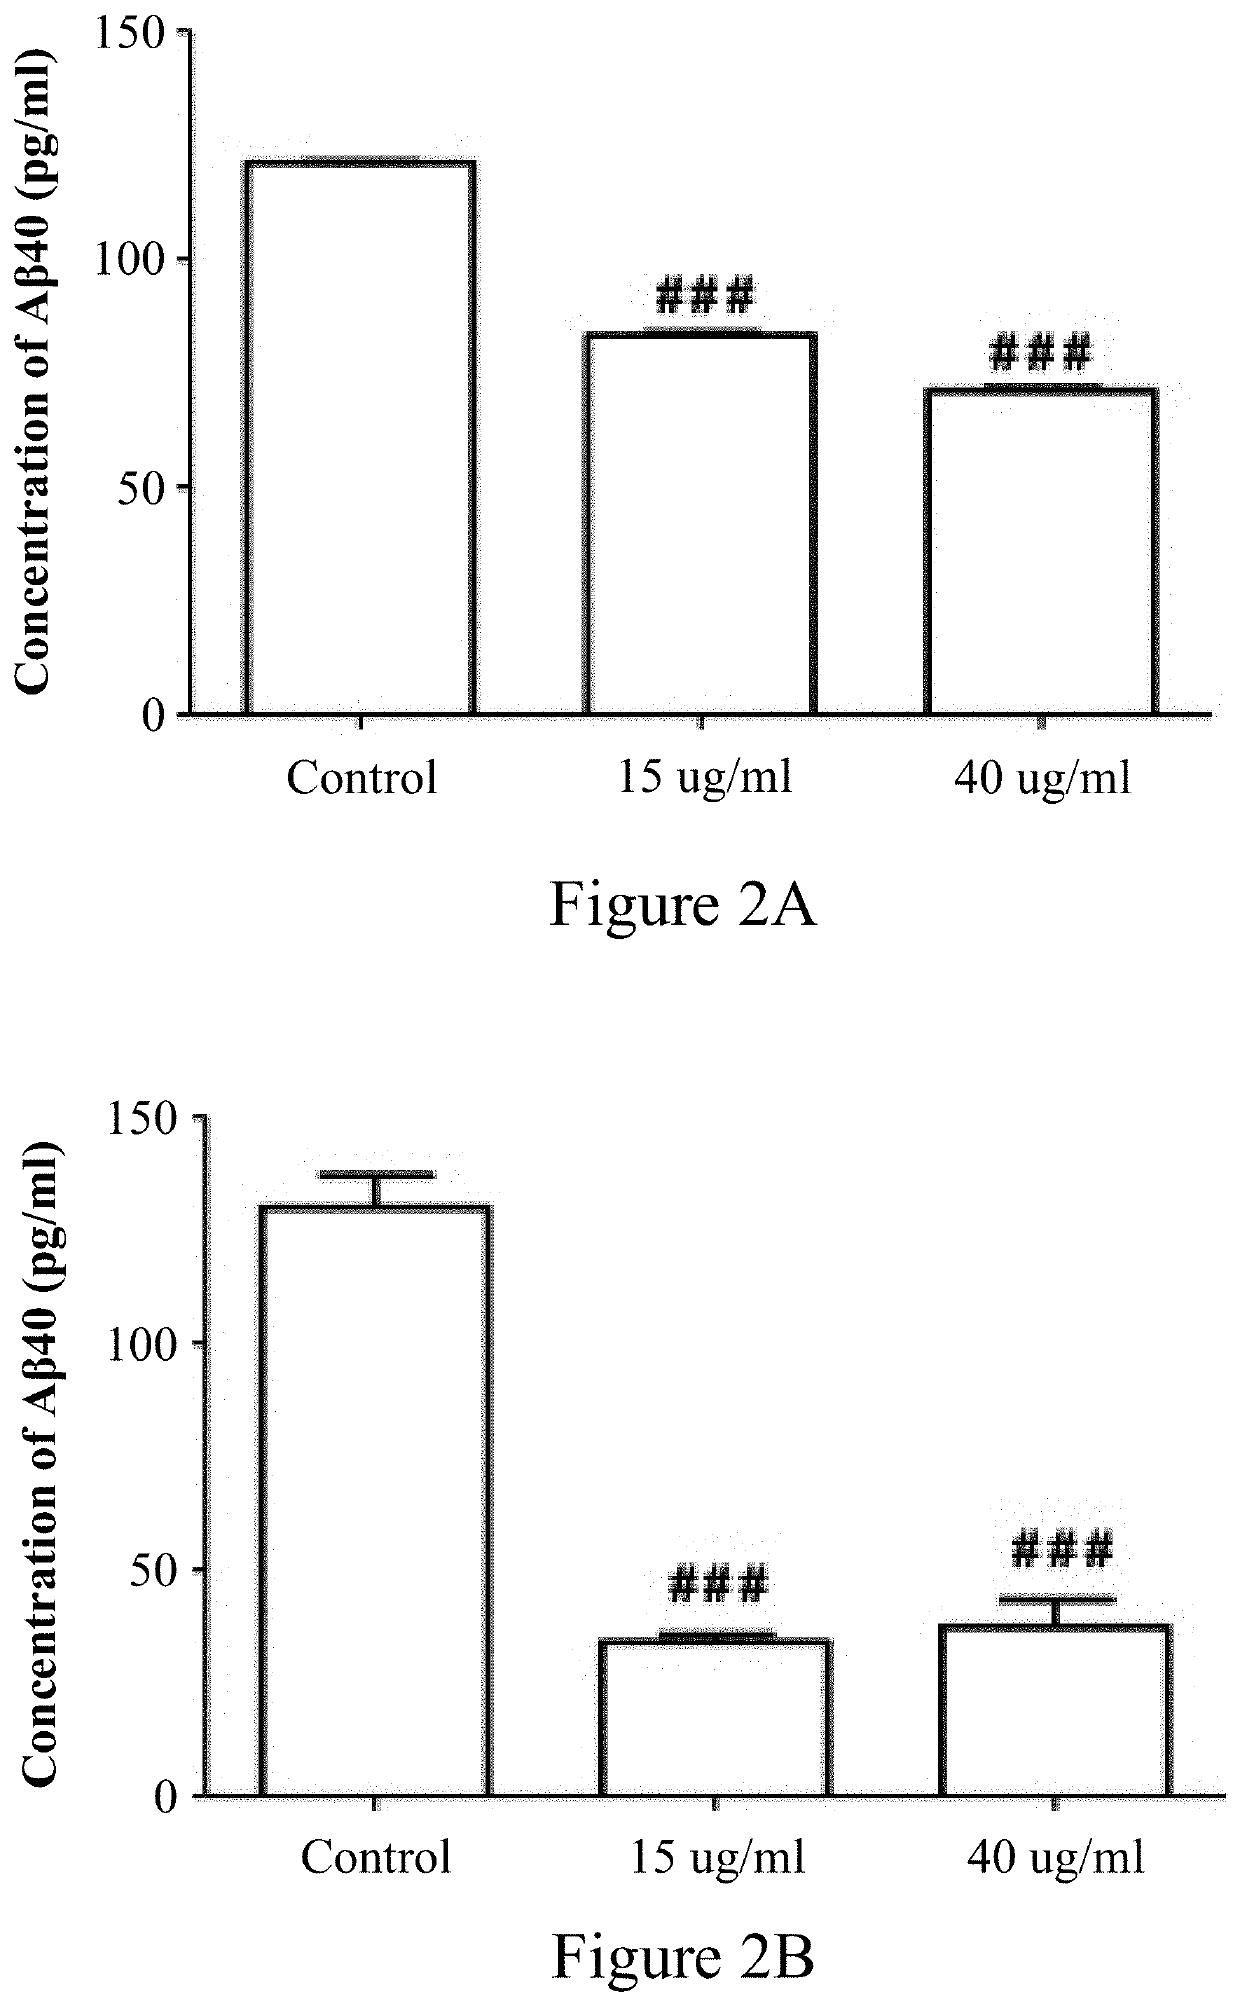 Method for treating and/or preventing alzheimer's disease